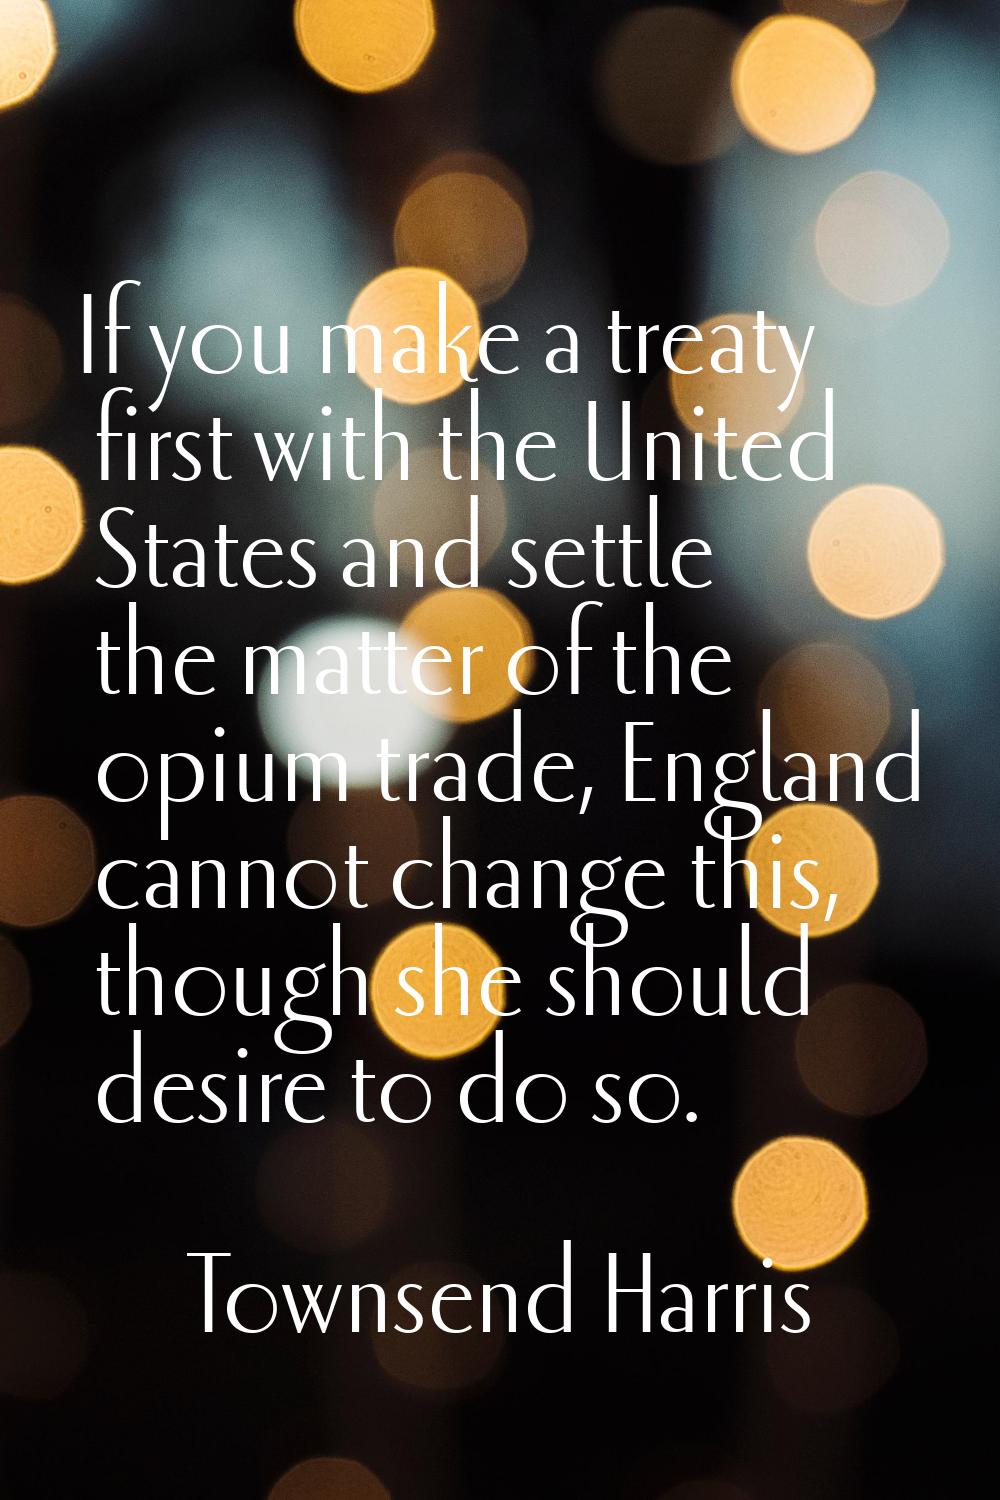 If you make a treaty first with the United States and settle the matter of the opium trade, England